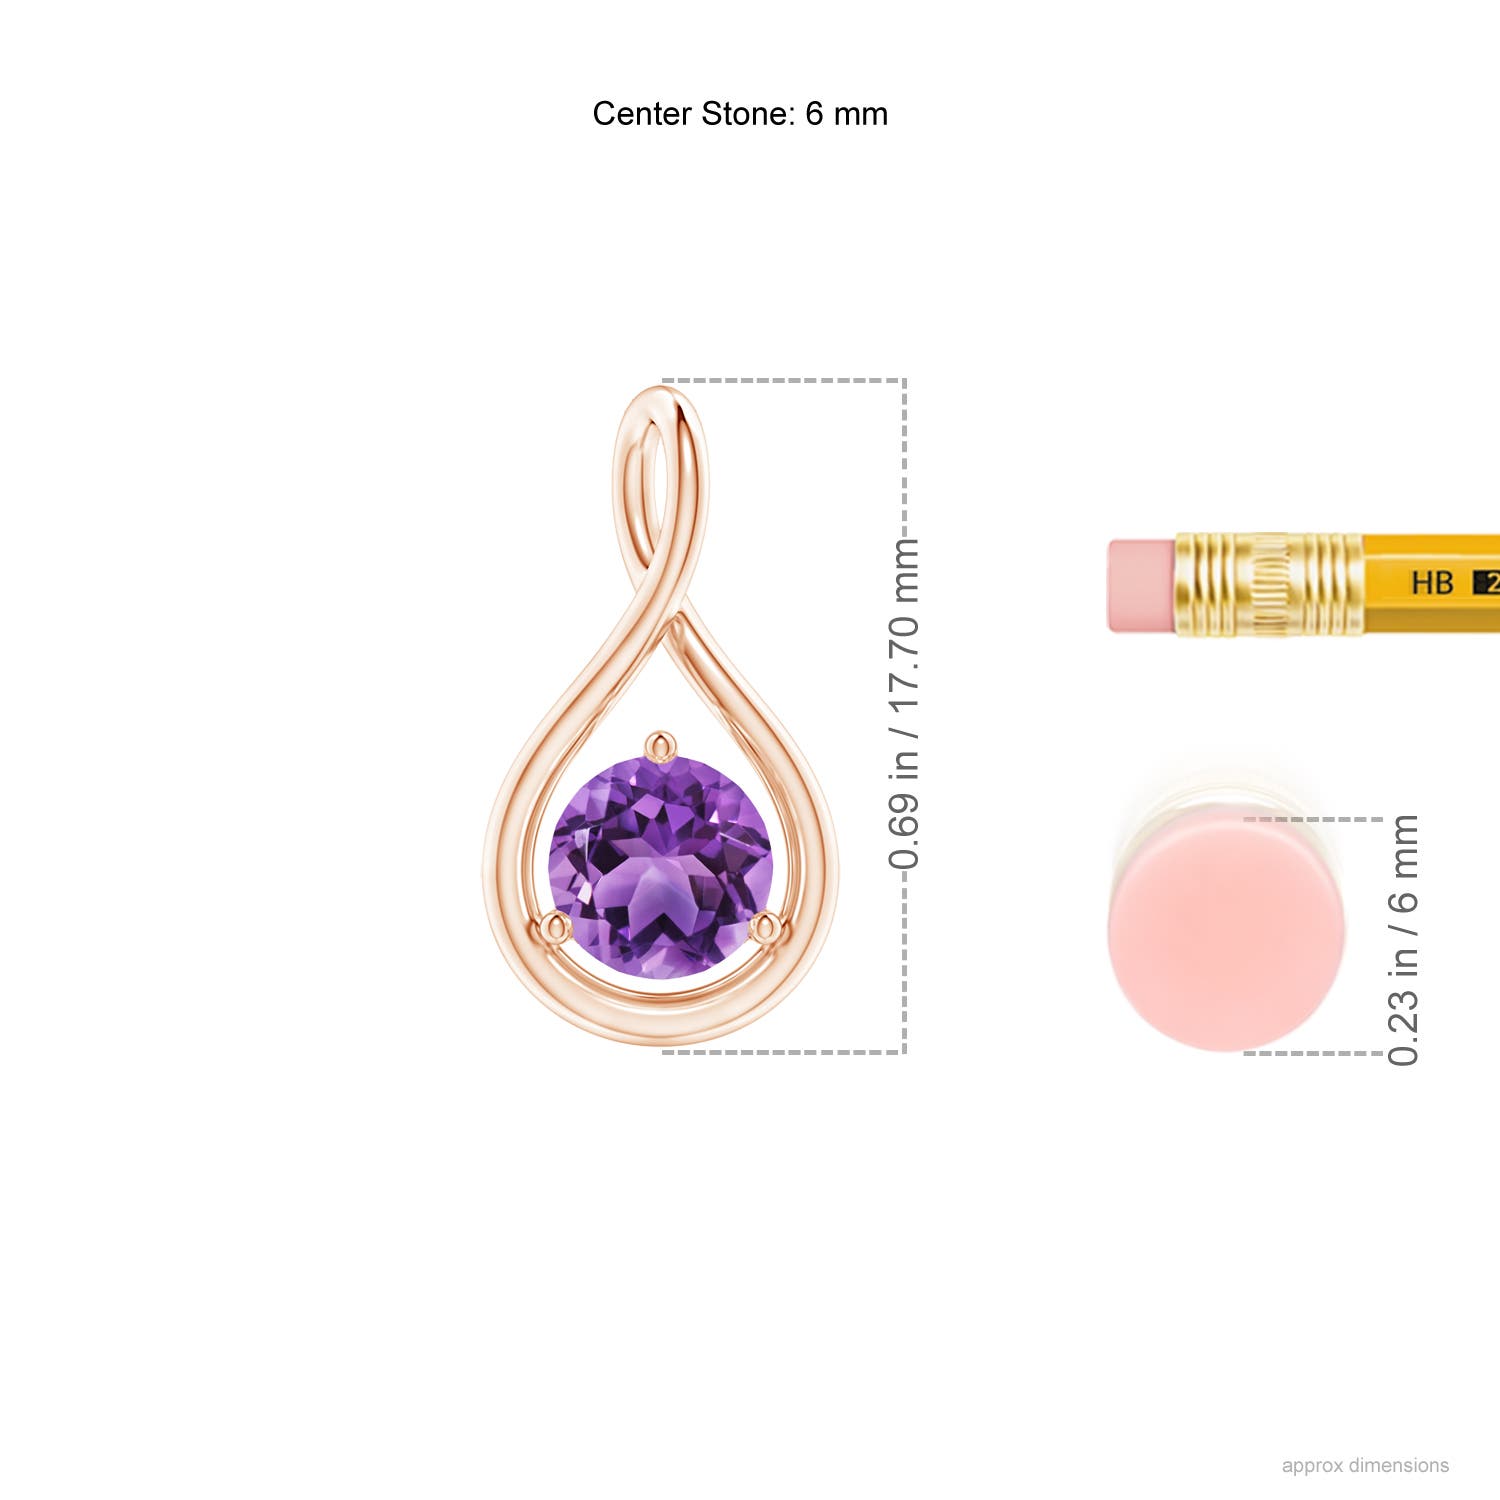 AA - Amethyst / 0.8 CT / 14 KT Rose Gold